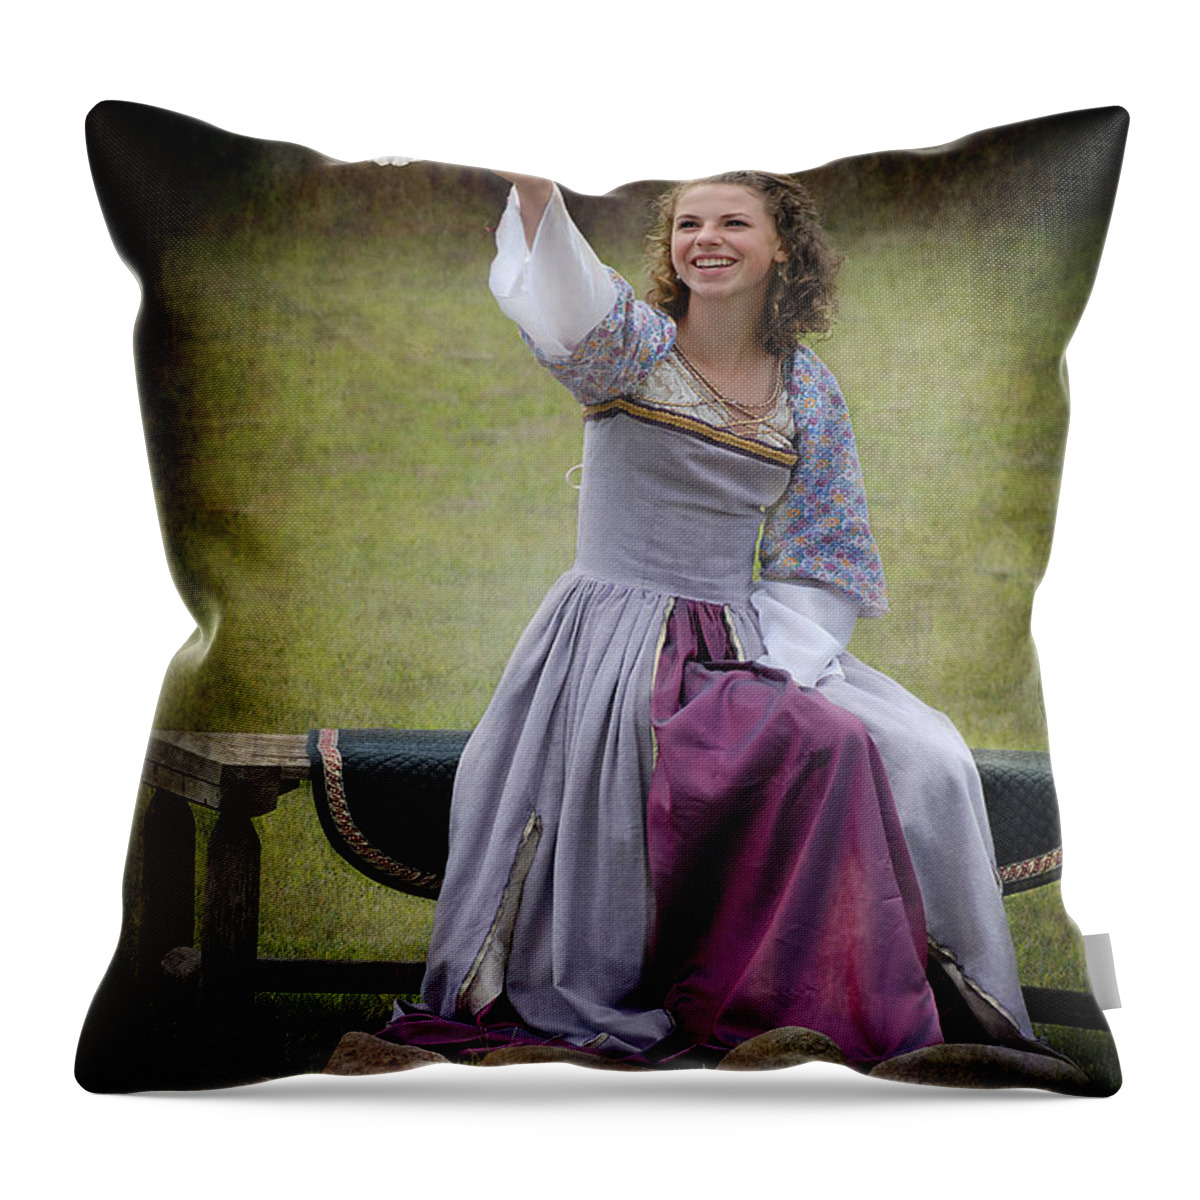 Dove Throw Pillow featuring the photograph The Dove by Fran J Scott